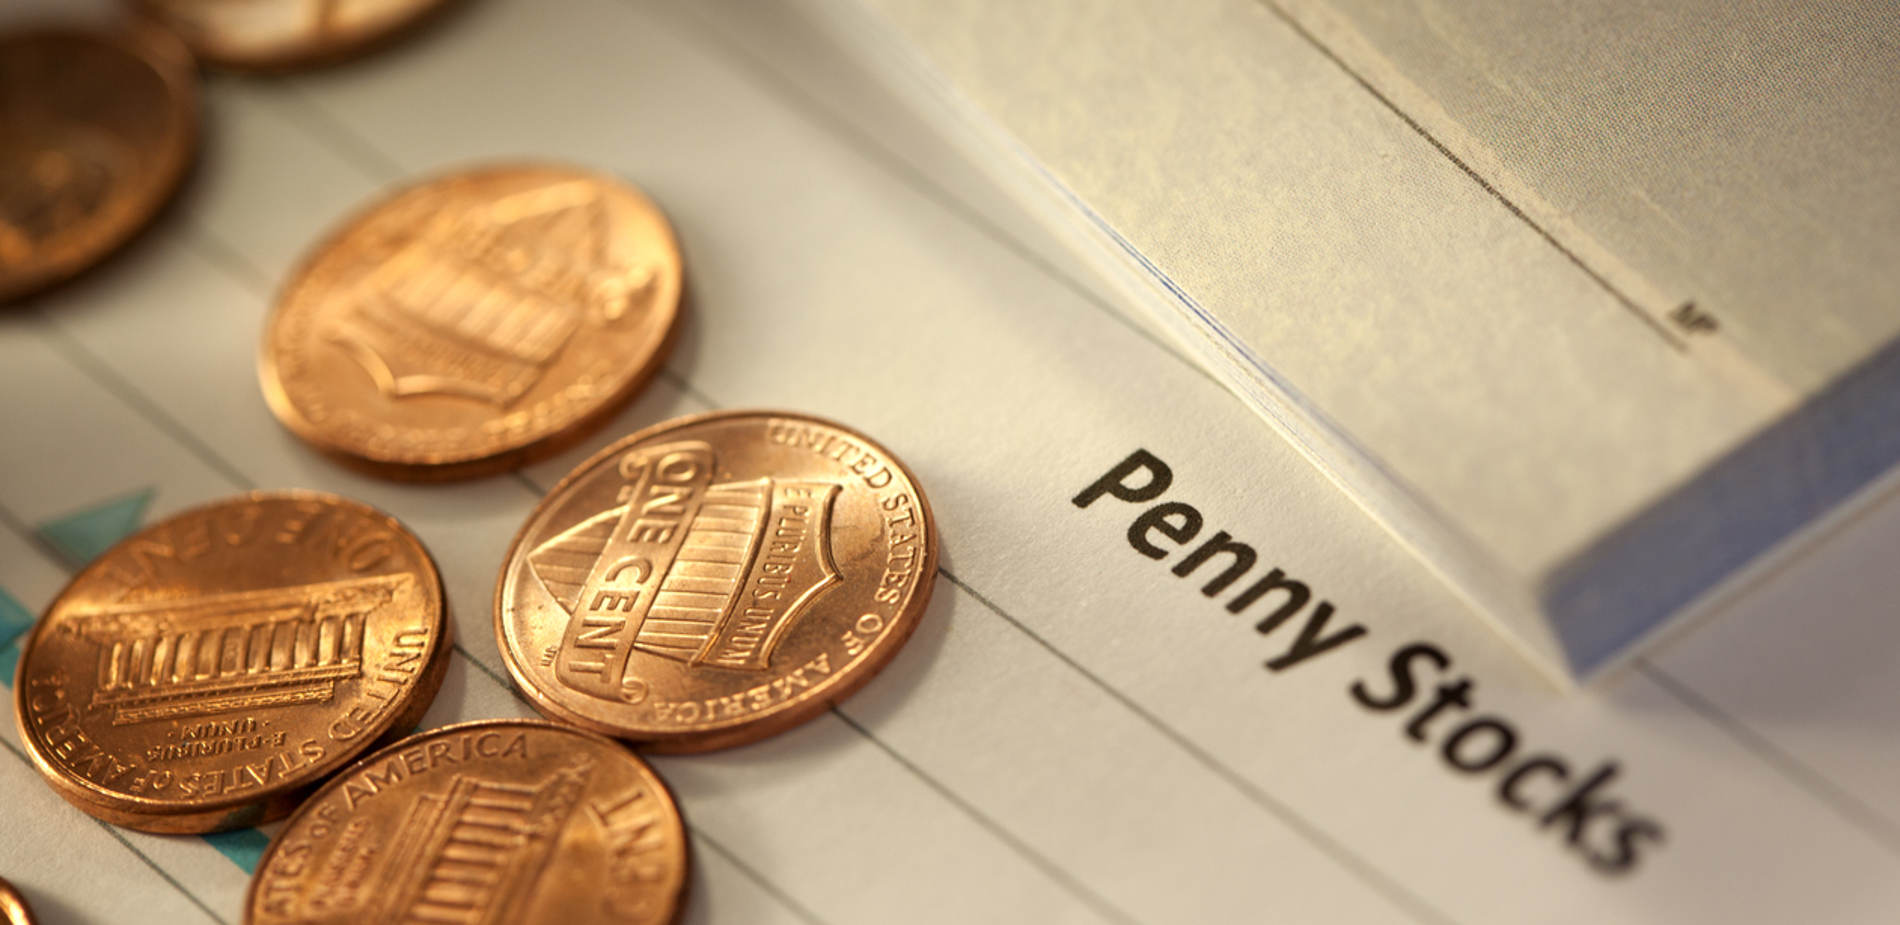 7 Top Penny Stocks That Could Soar in 2017